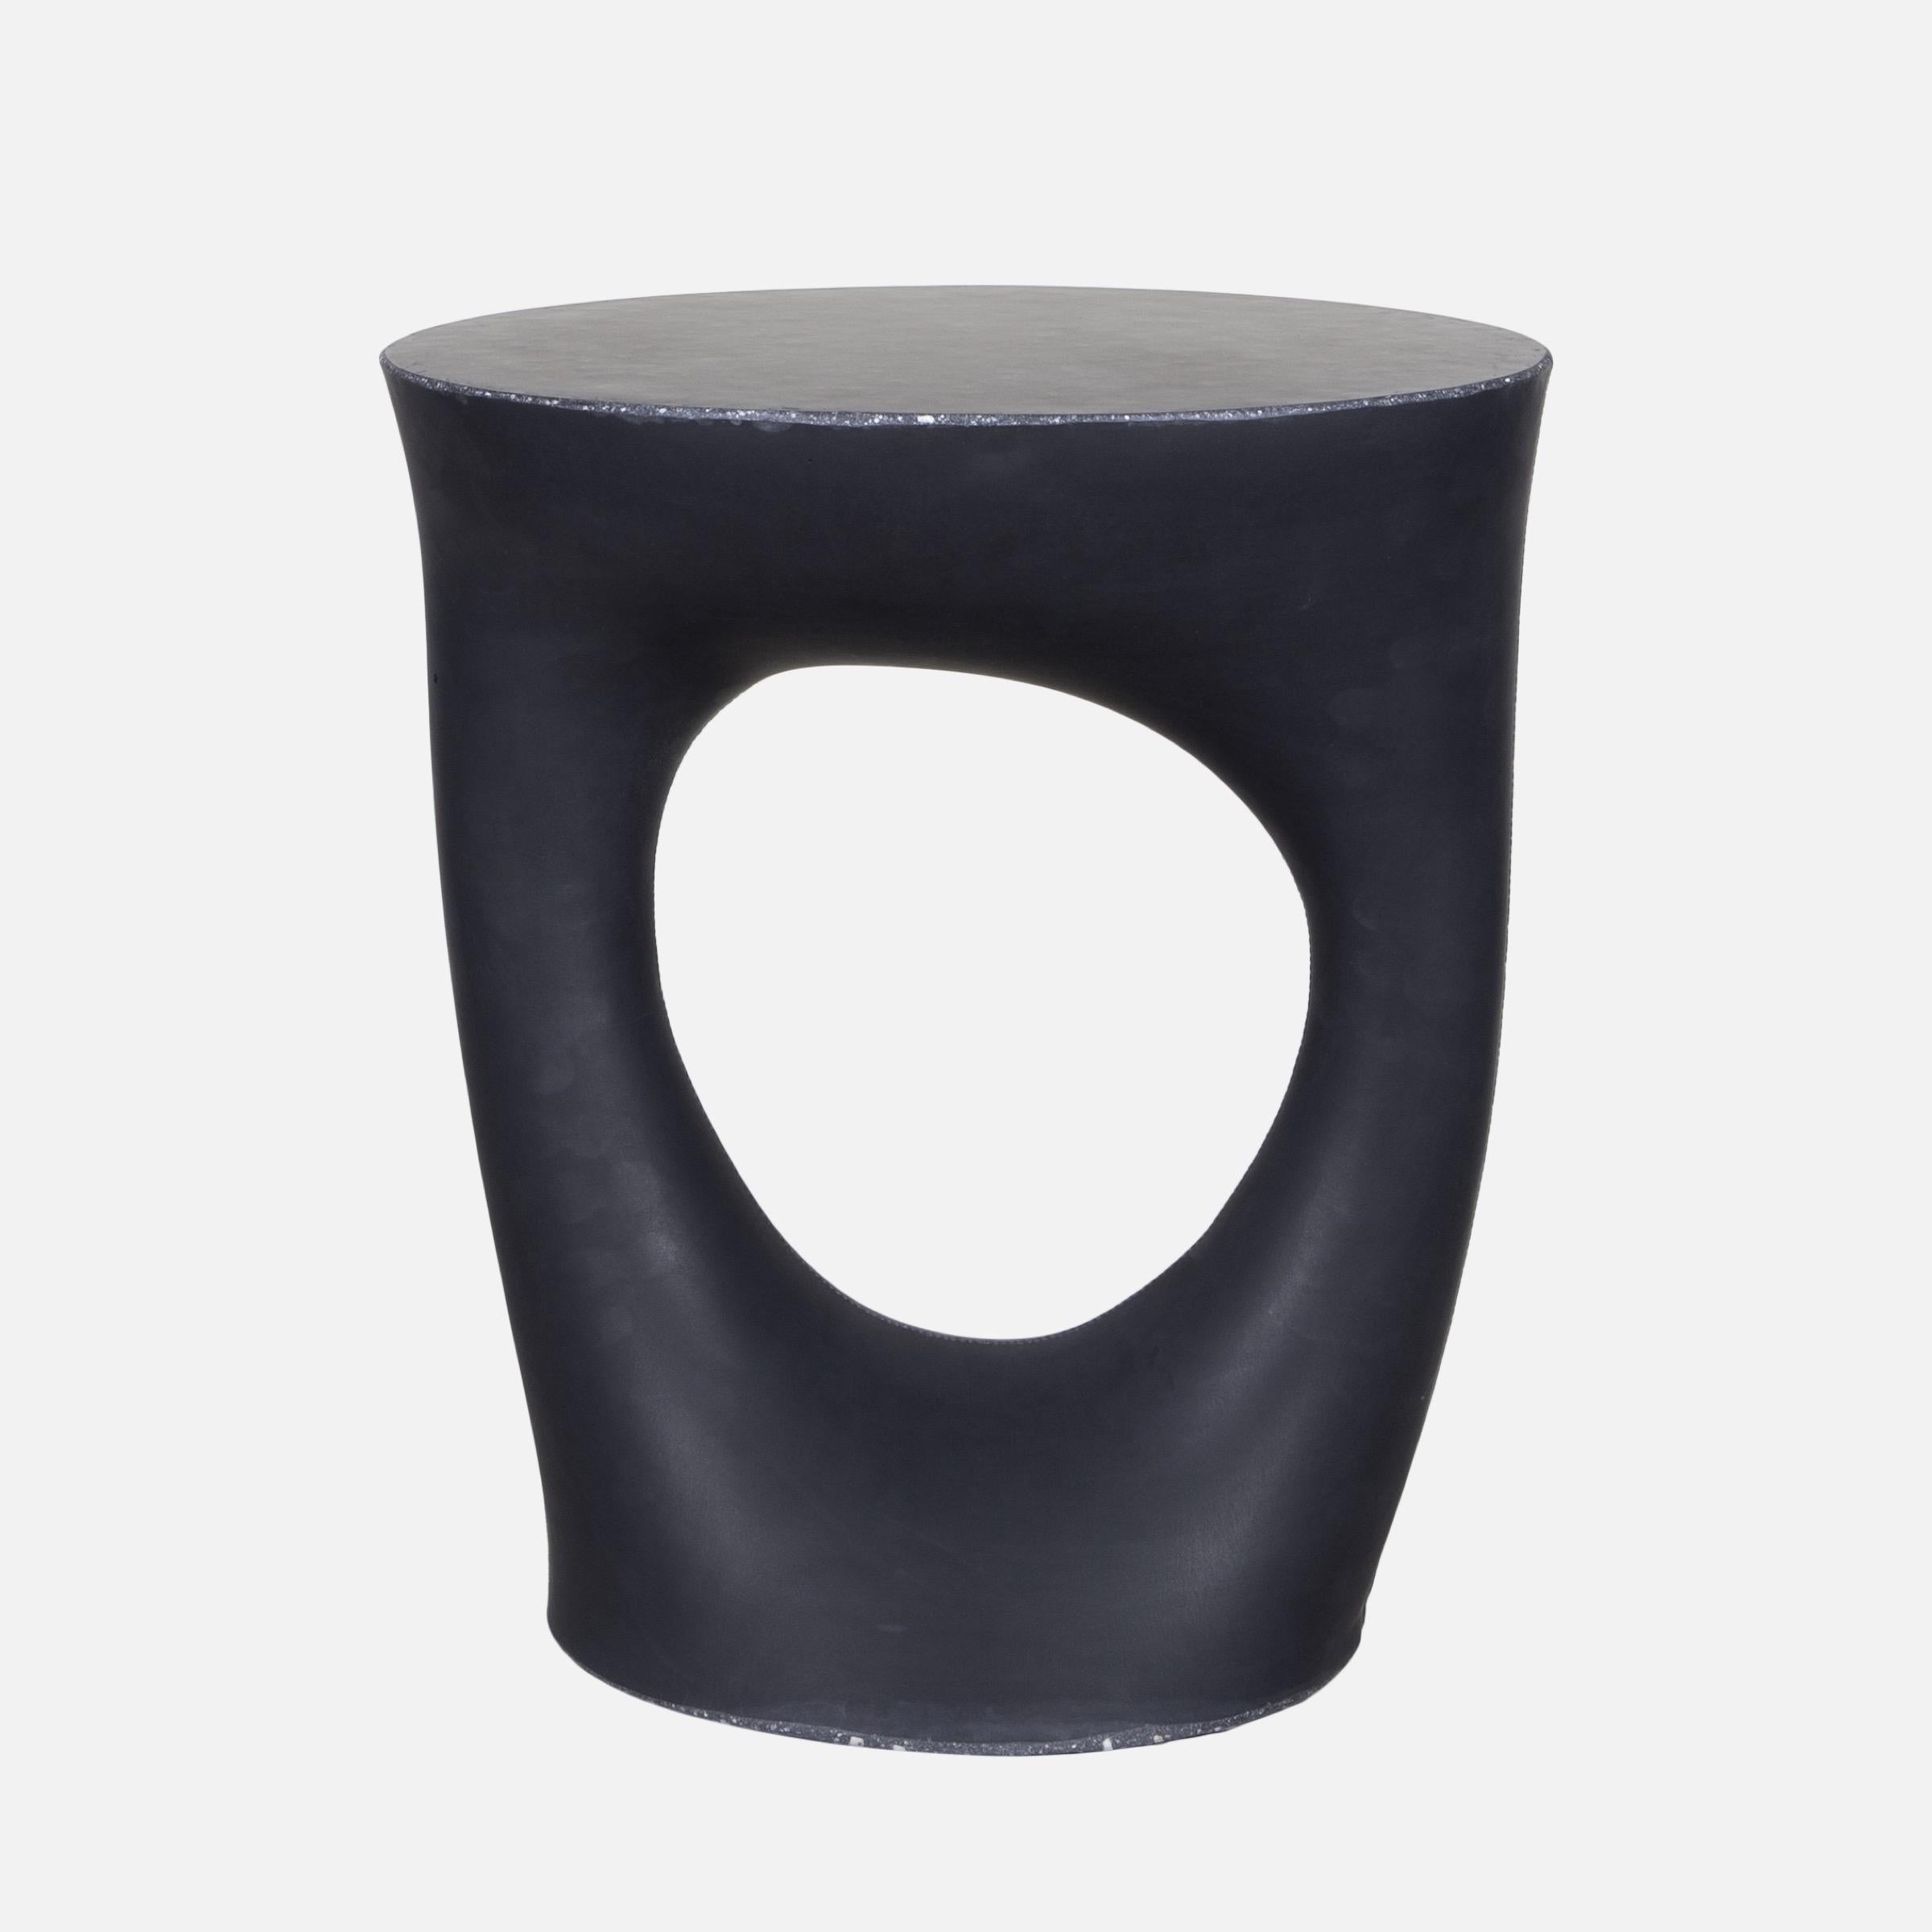 American Black Kreten Side Tables from Souda, Tall, Made to Order